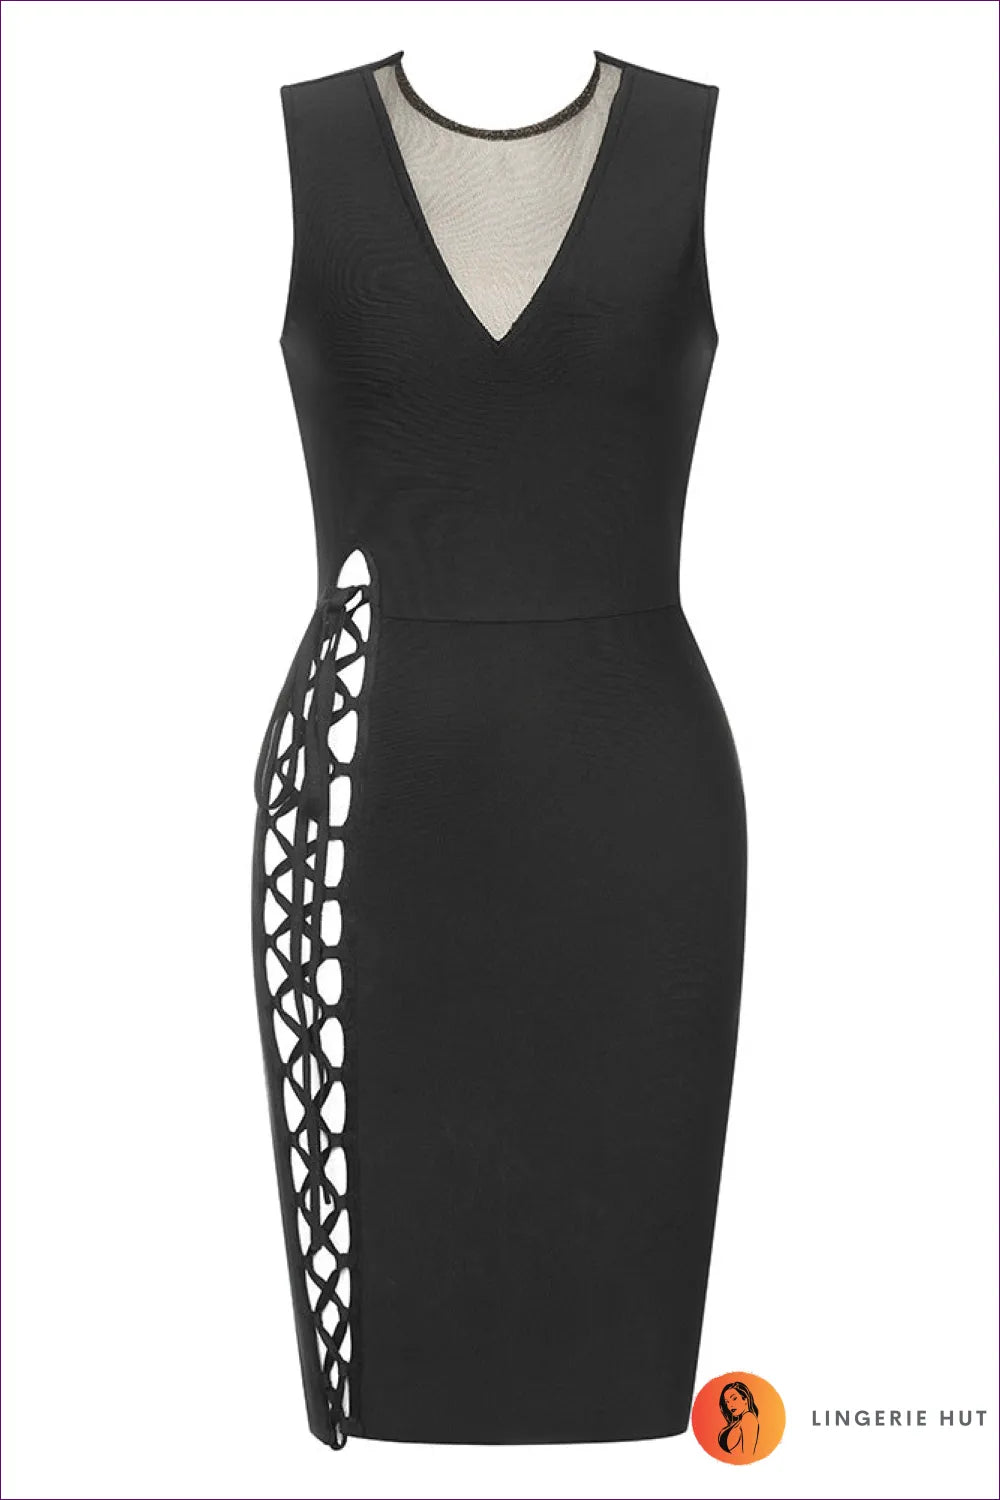 Get Ready To Turn Heads With Our V-neck Side Lace-up Bandage Dress. Flaunt Your Curves And Create a Sultry